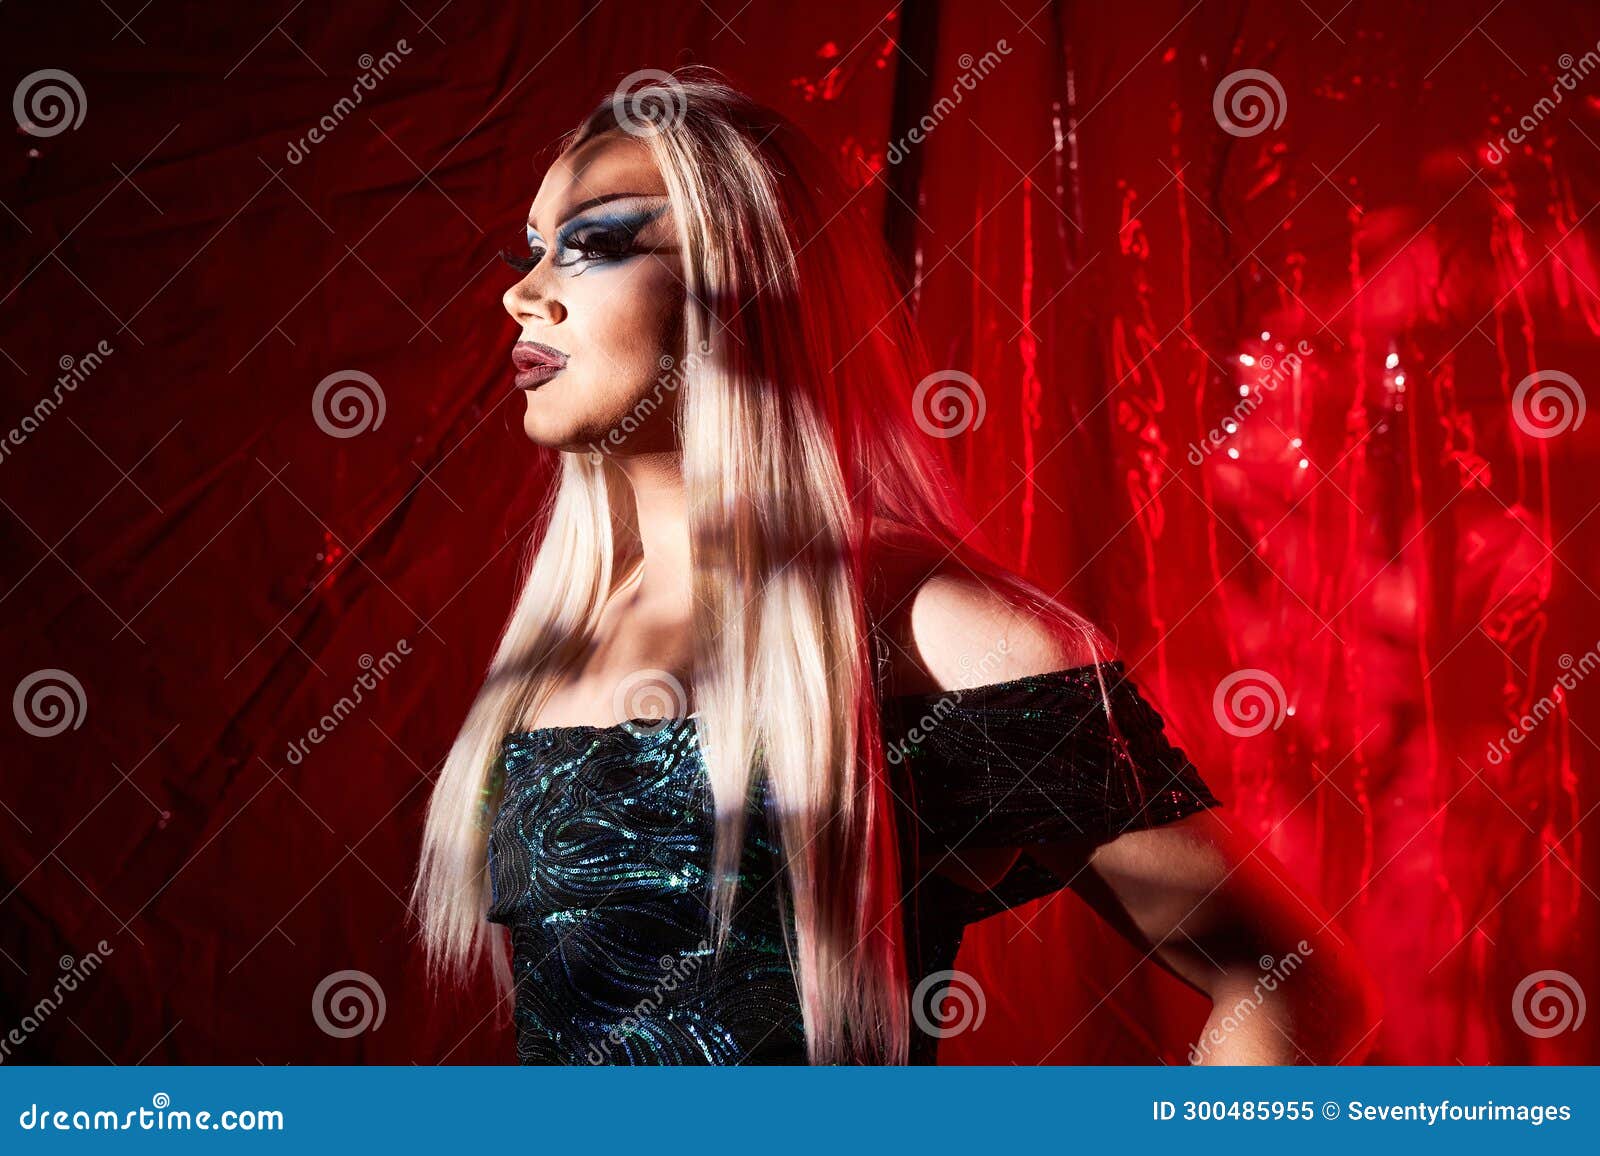 drag queen standing on stage